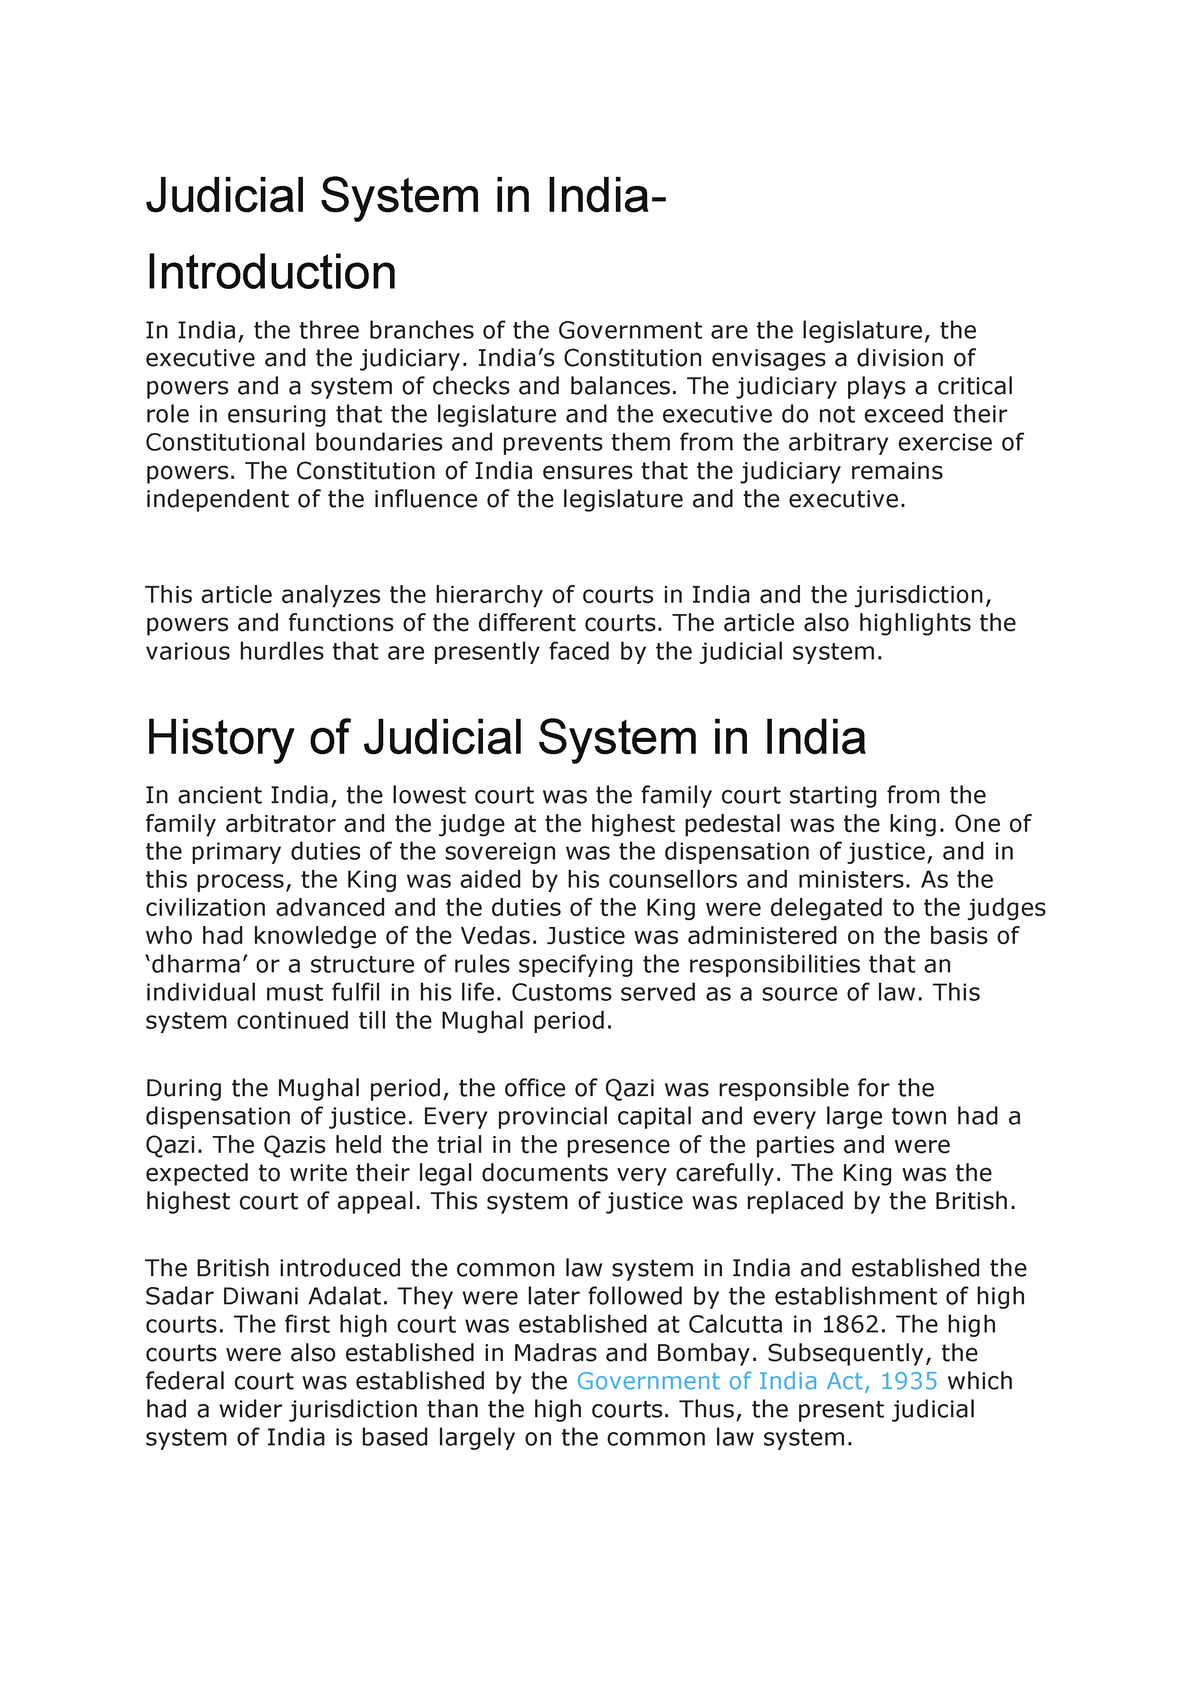 judicial system in india research paper